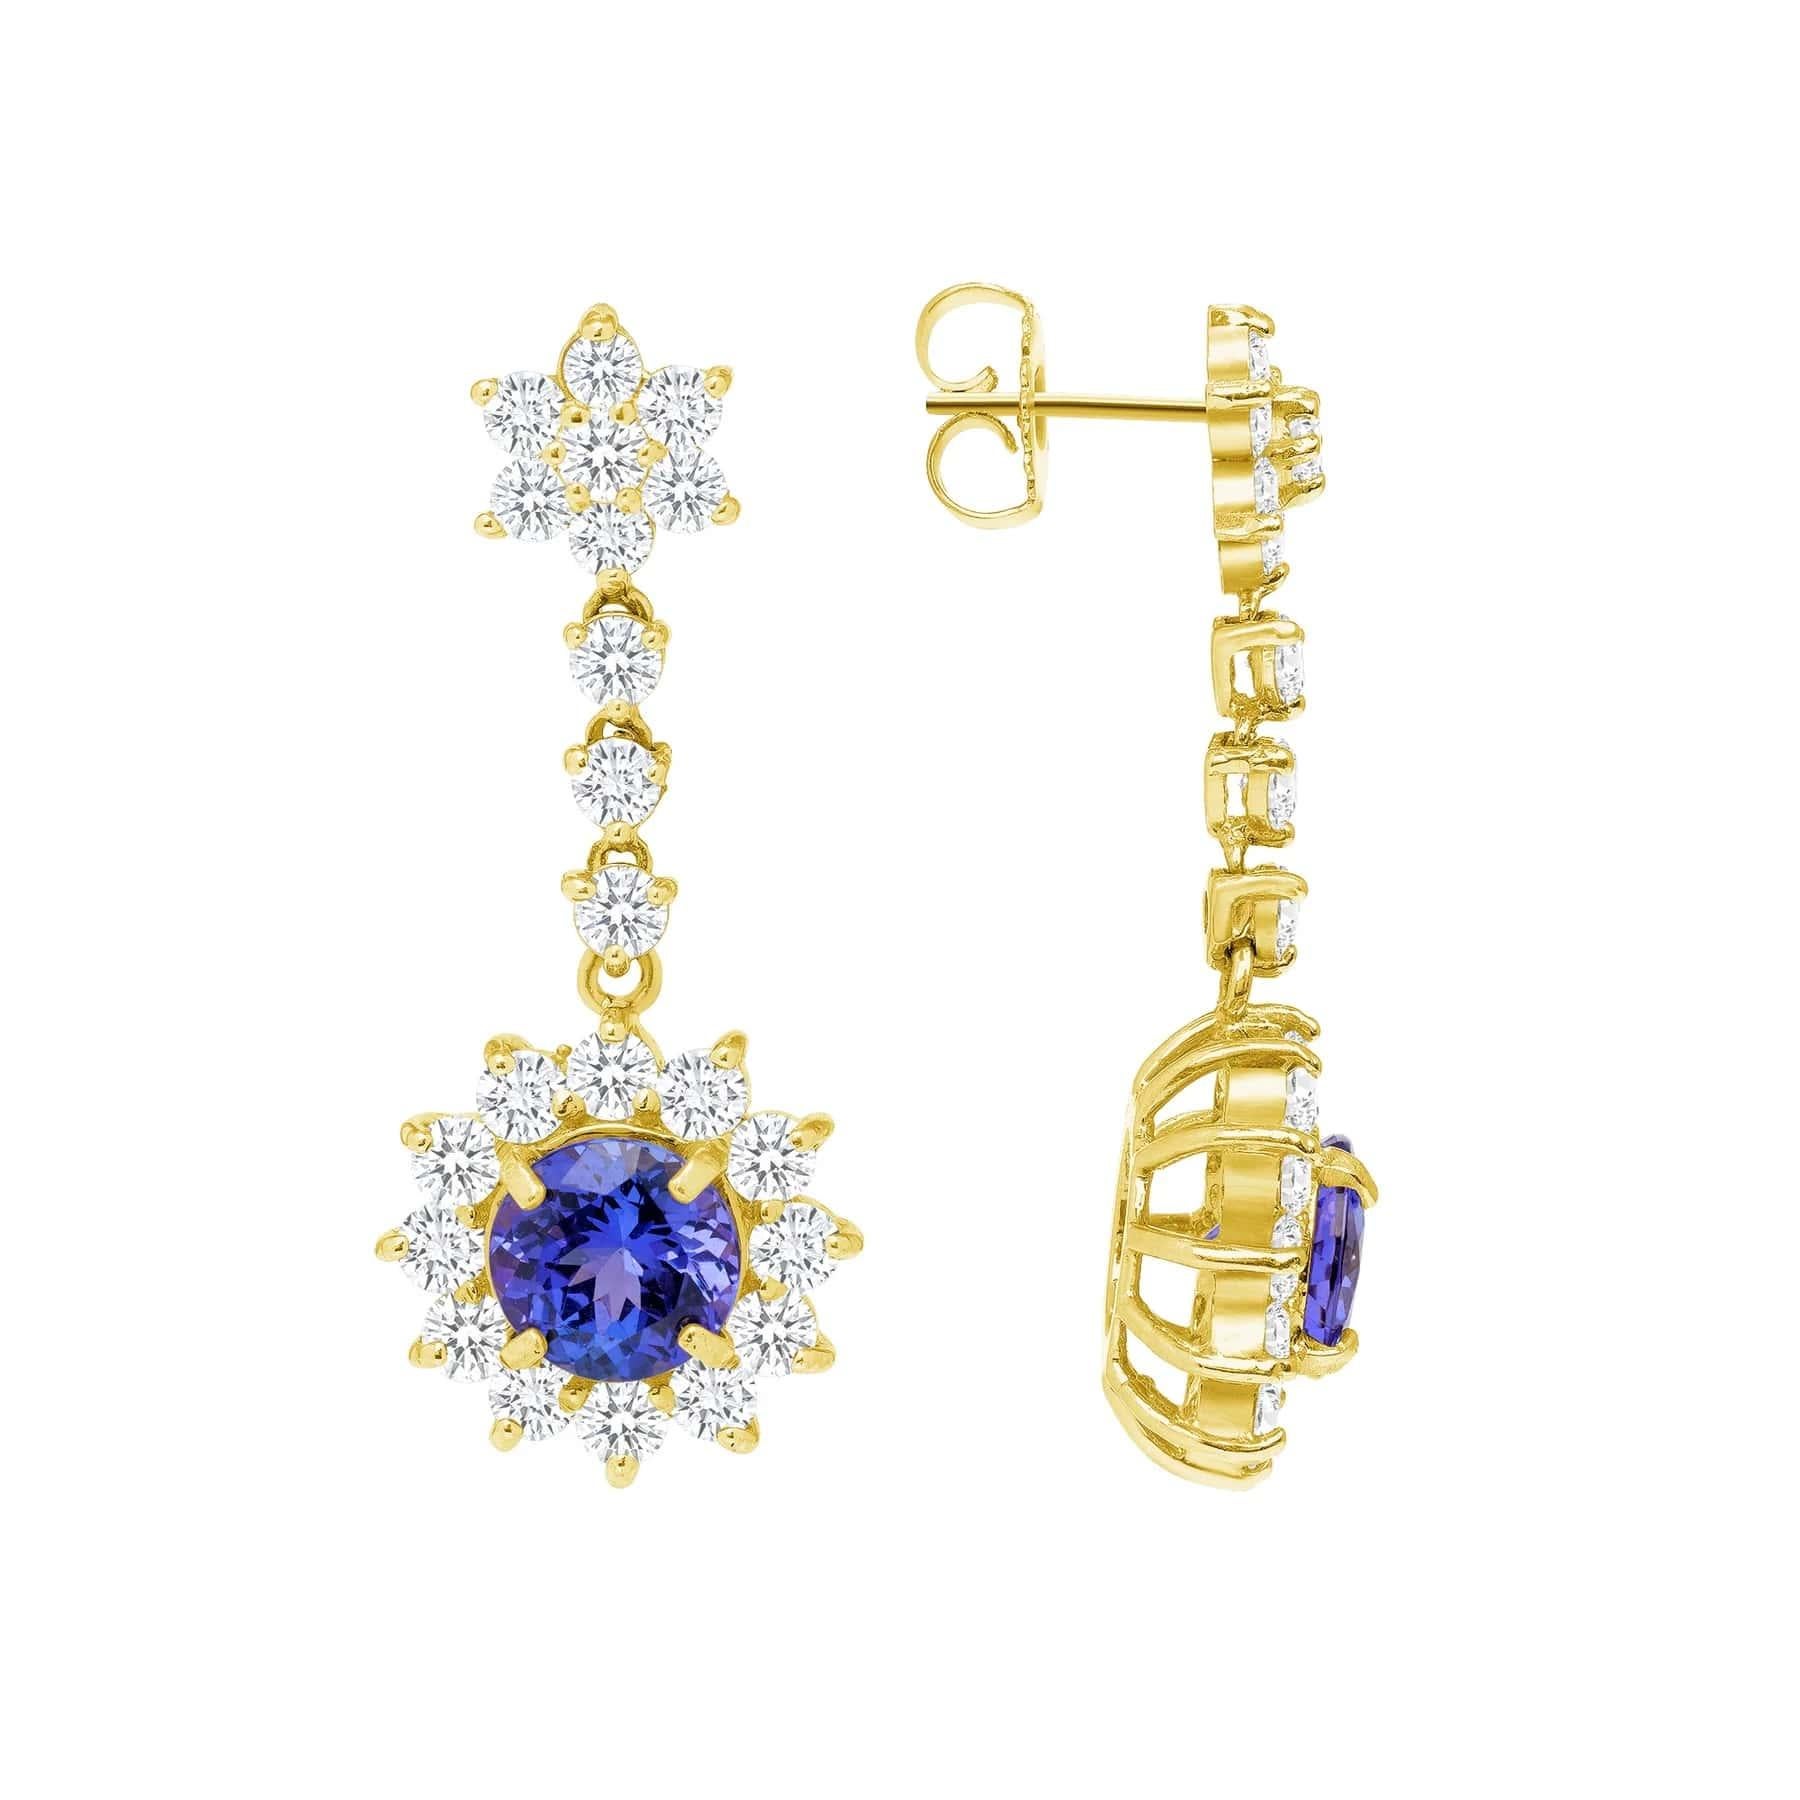 Perfect as a gift for Anniversary, Birthday, Wedding, and/or Holiday.

Earring Information
Setting : Halo
Metal : 14k Gold
Diamond Carat Weight : 1 Carat
Gemstone Type : Blue Sapphire (Center Stones) and Diamonds (Side Stones)
Diamond Clarity : VS